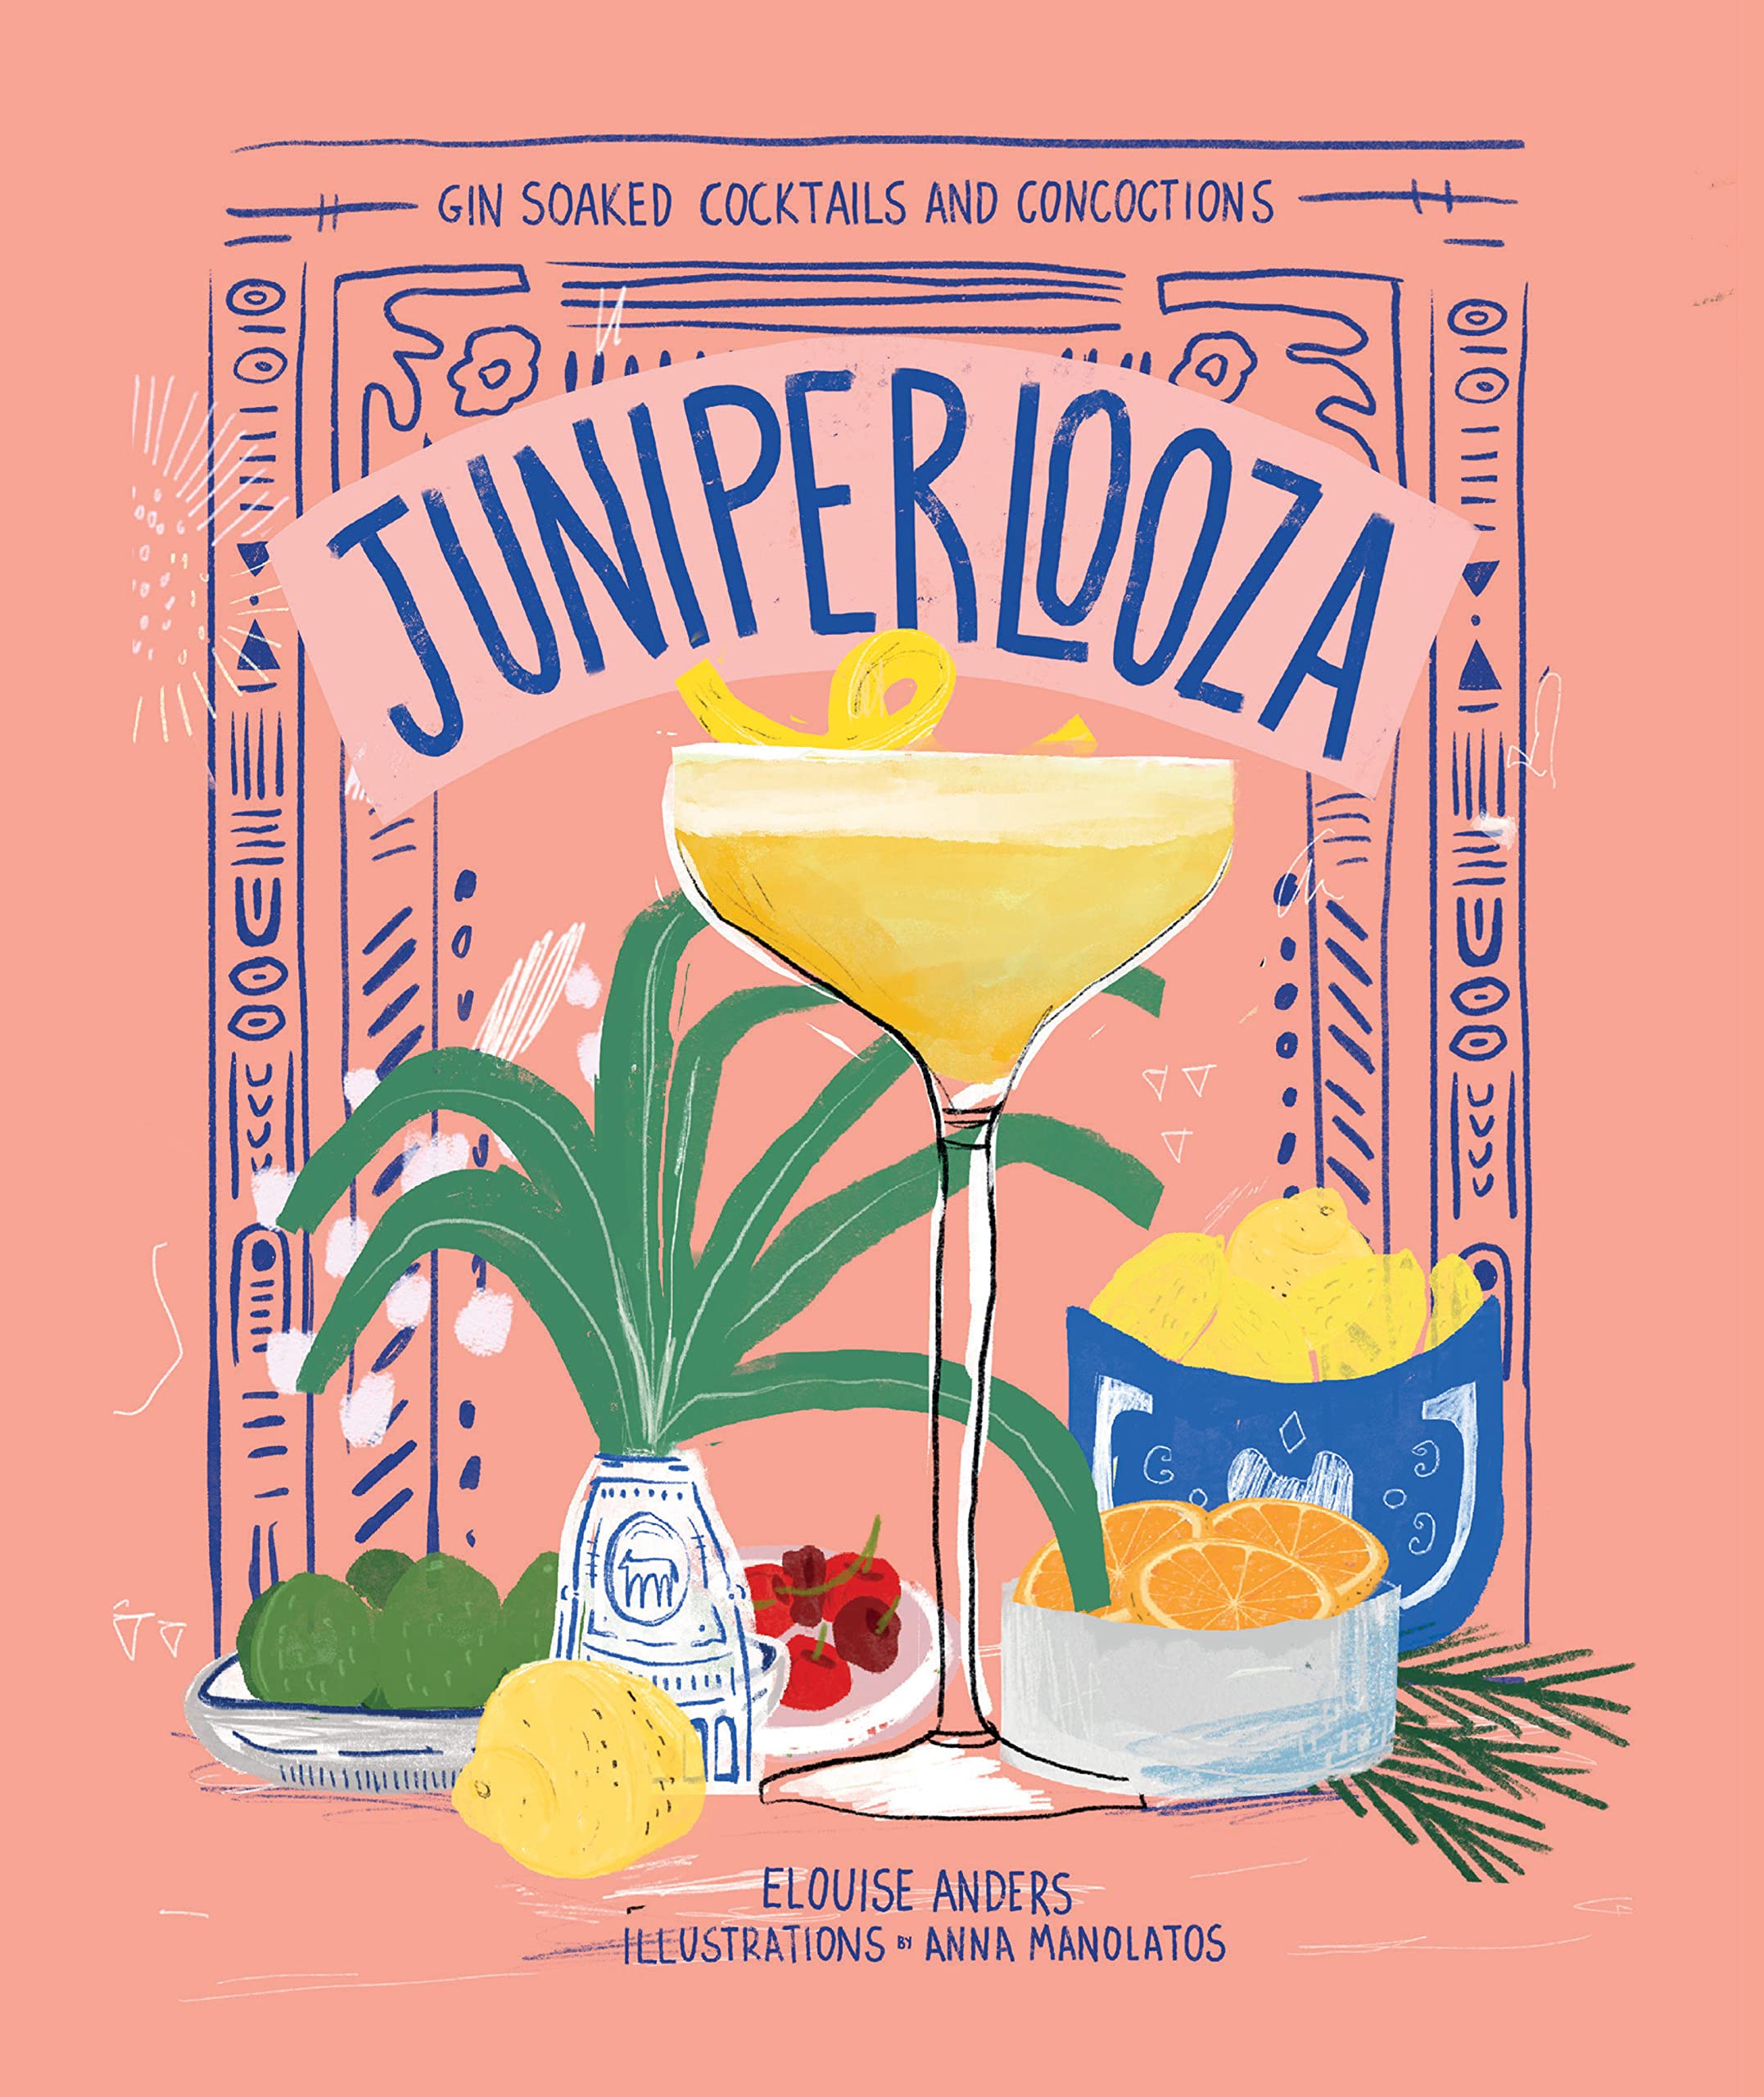 Juniperlooza: Gin-soaked Cocktails and Concoctions (Elouise Anders, Anna Manolatos)